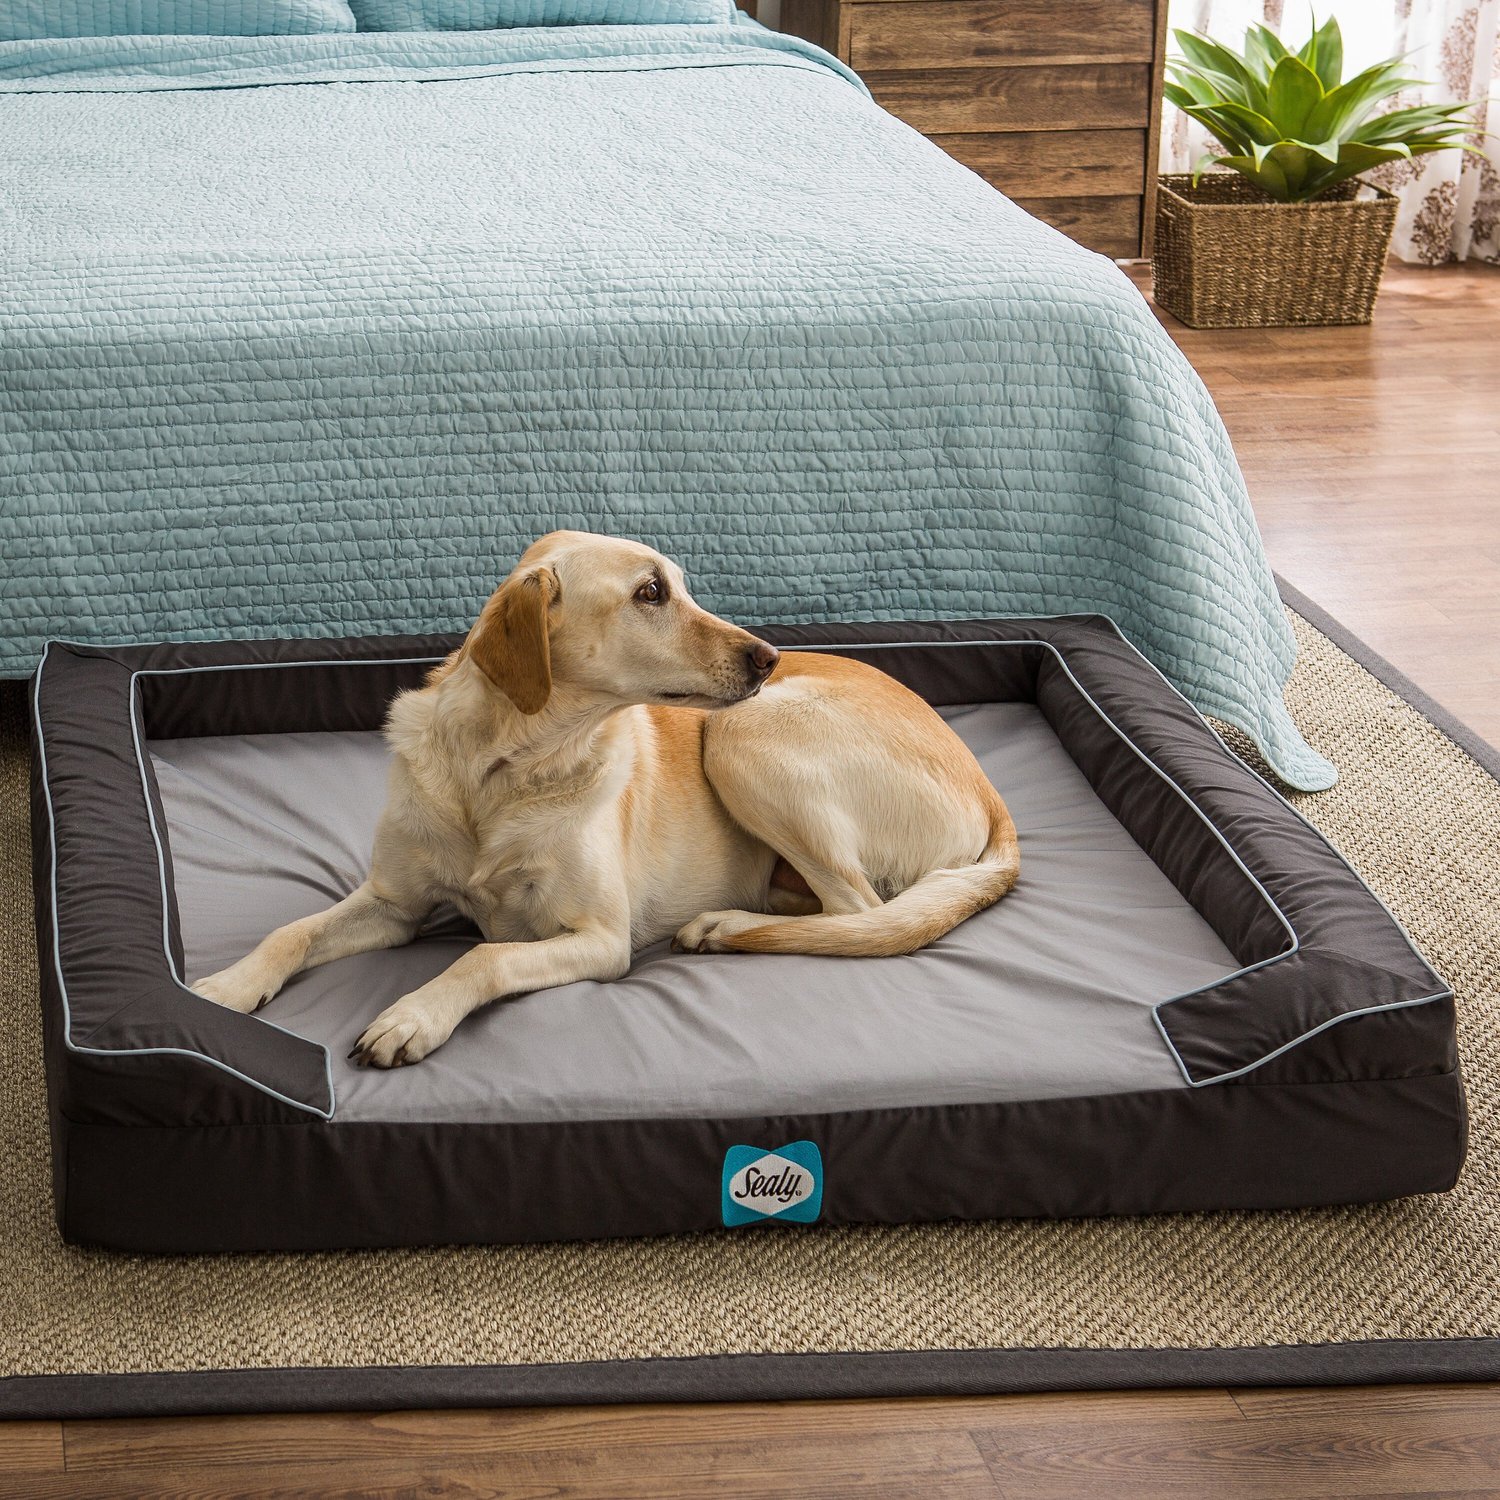 Sealy Lux Premium Orthopedic Dog Bed, Grey, Small